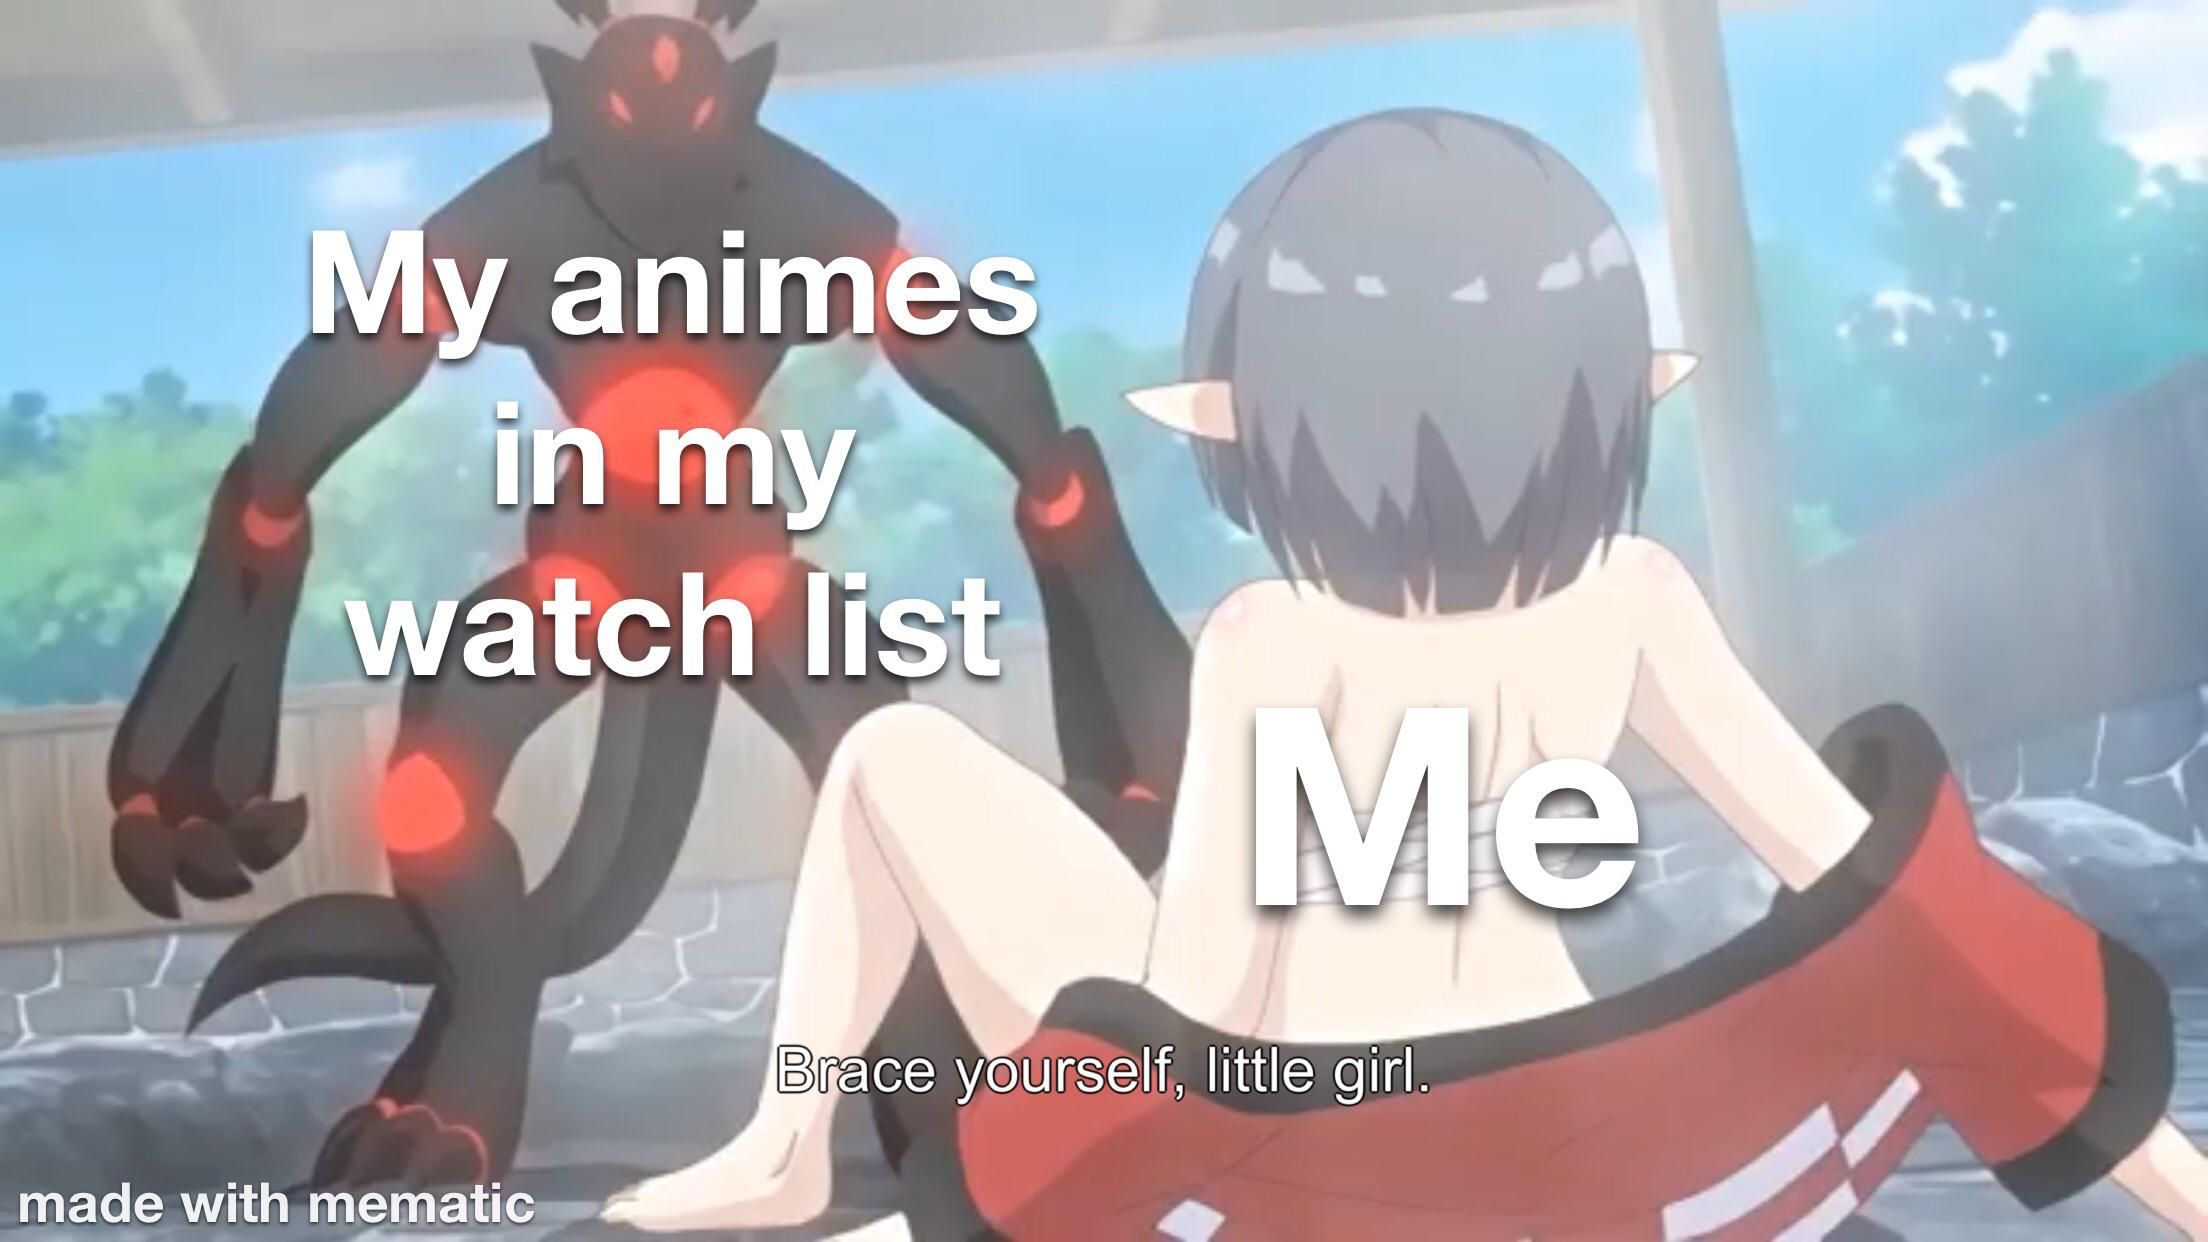 It’s been 84 years since i last saw my “to watch” list